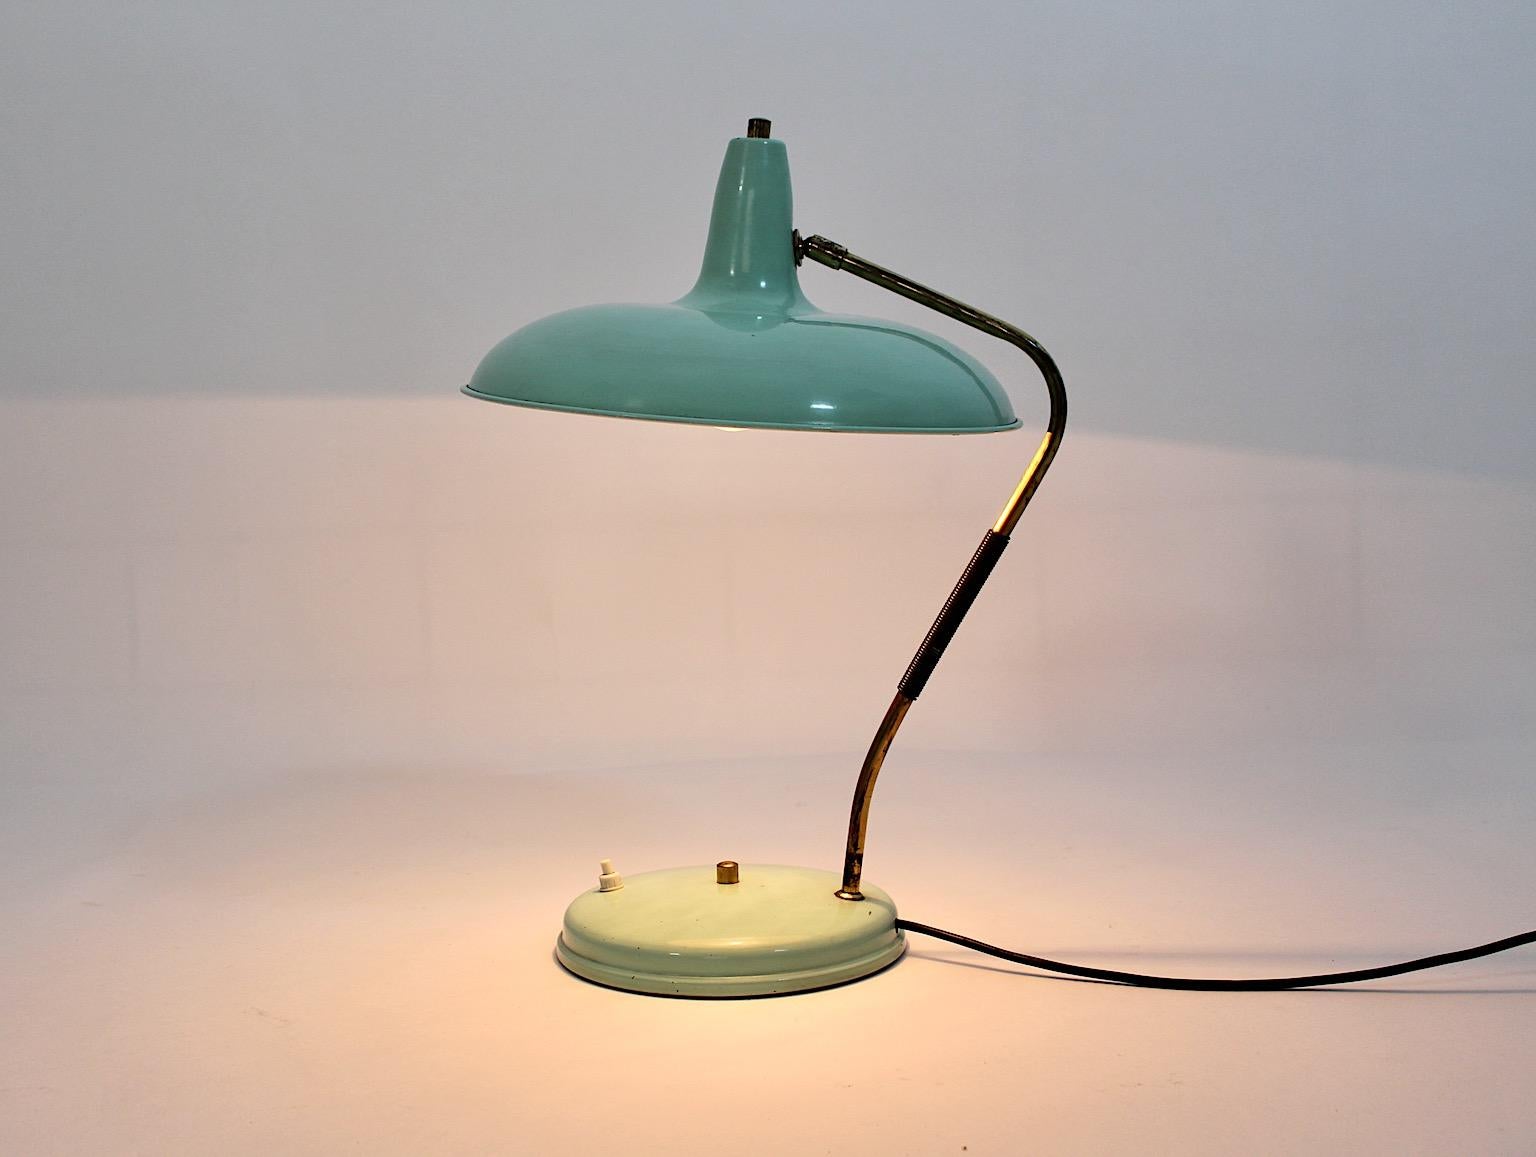 Mid-Century Modern vintage teal turquoise table lamp or desk lamp from metal and brass, 1950s Italy.
A wonderful table lamp or desk lamp by Stilnovo made from metal and brass details in pastel blue or turquoise color tone, 1950s Italy.
This table